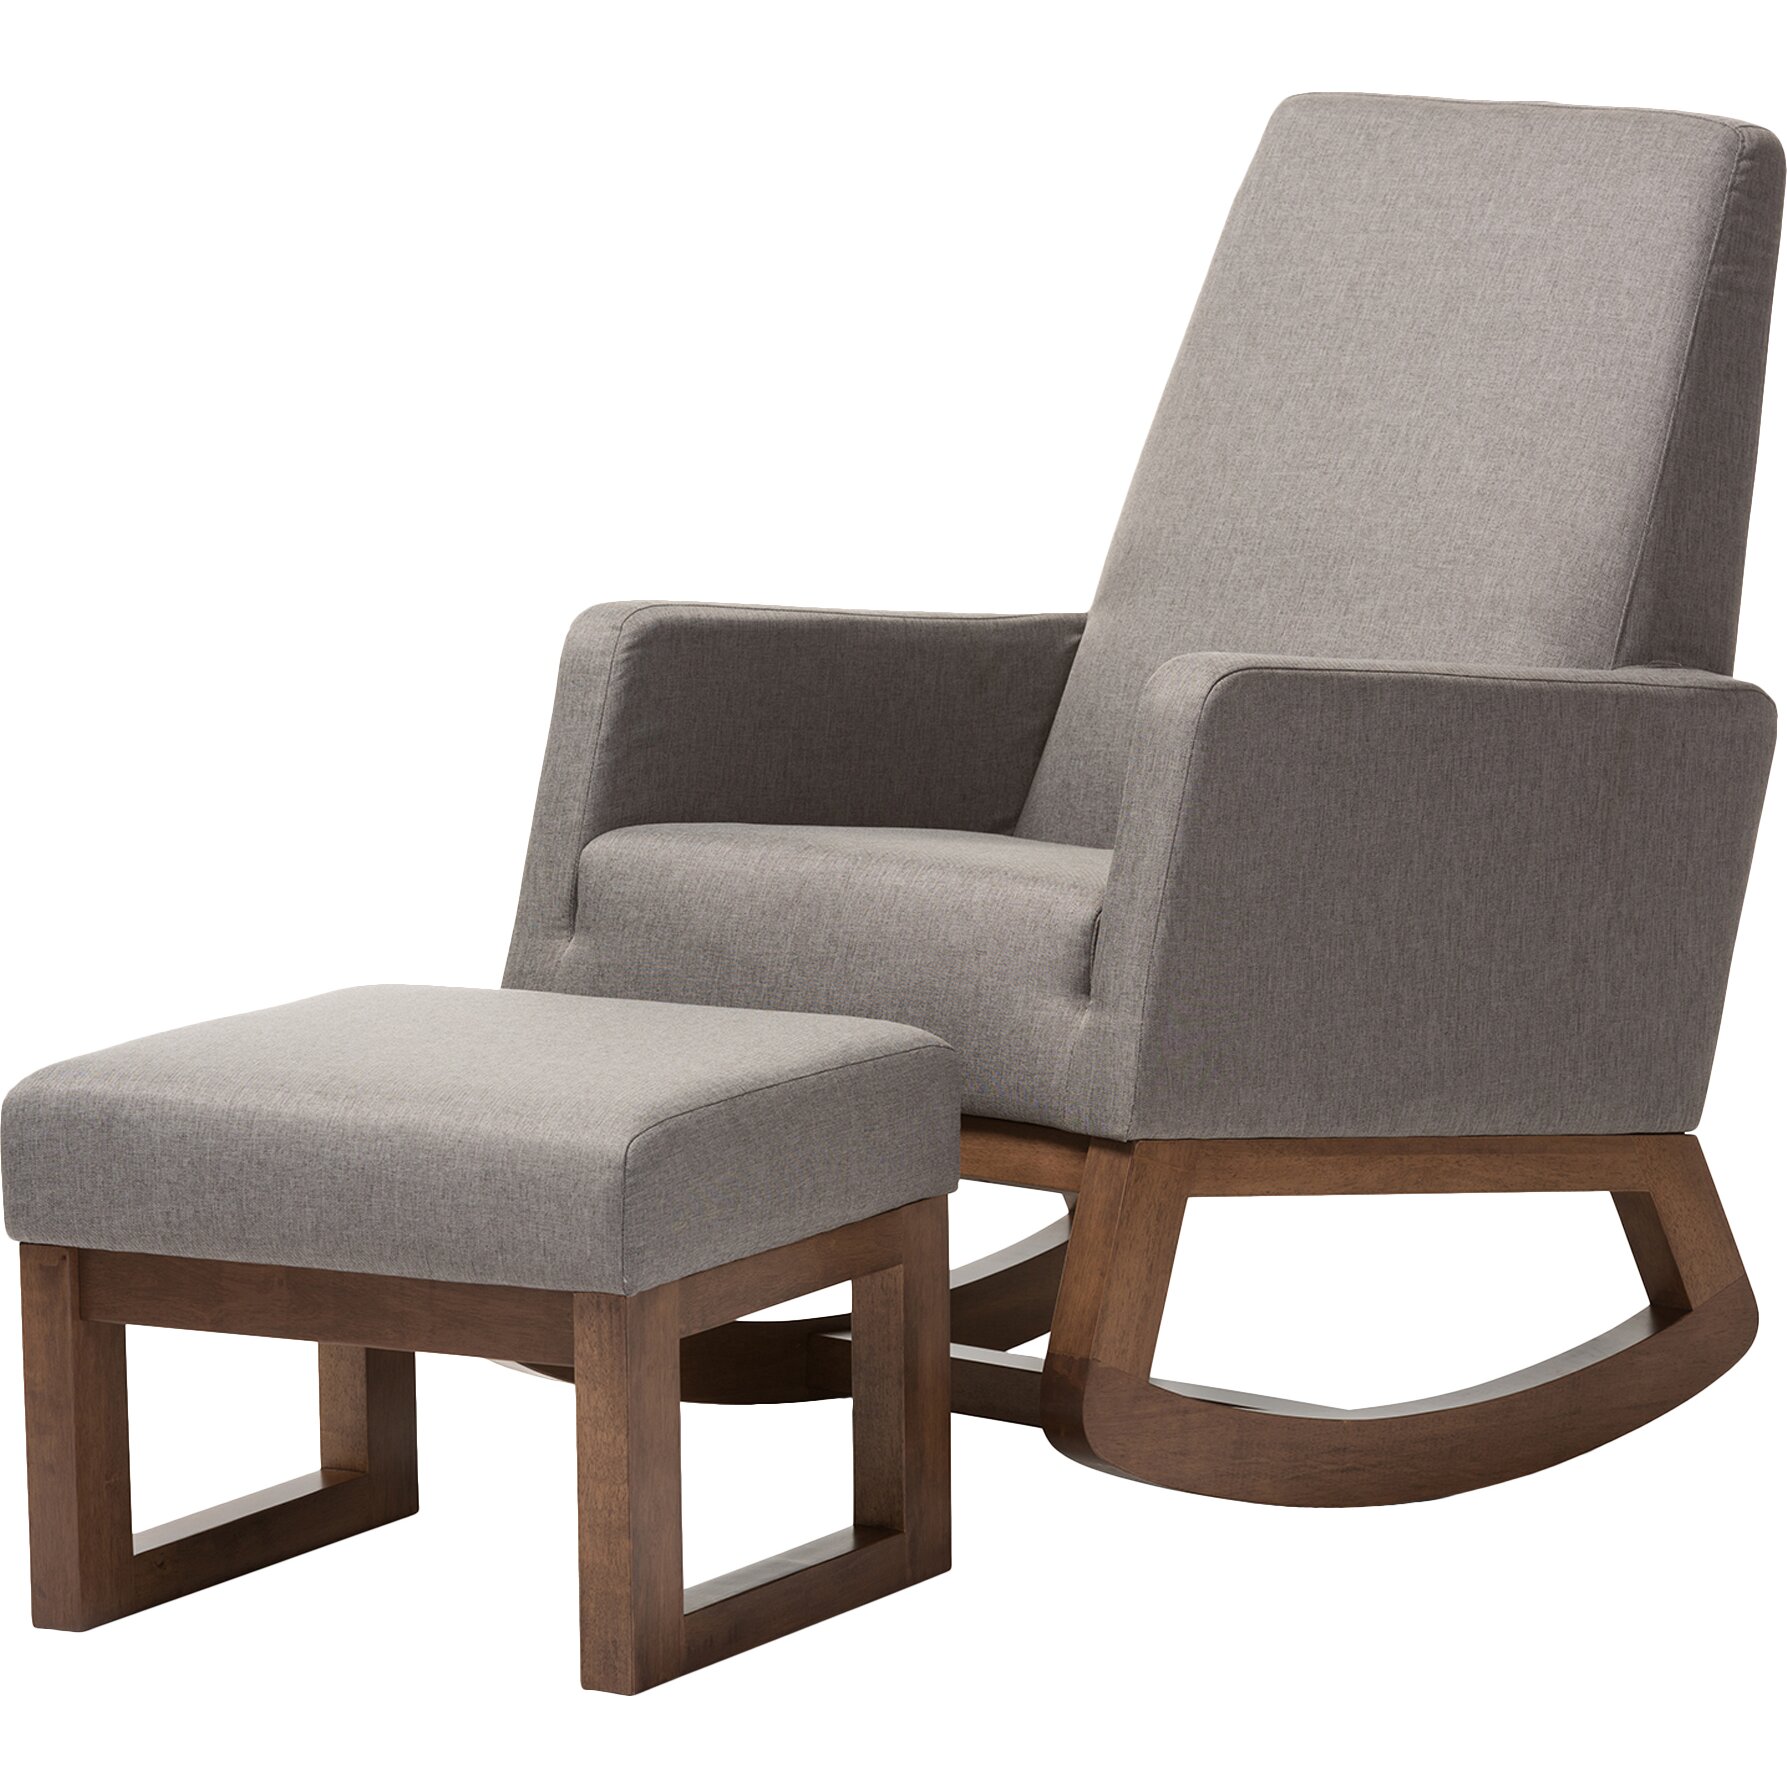 Furniture Living Room Furniture Rocking Chairs Wholesale Interiors